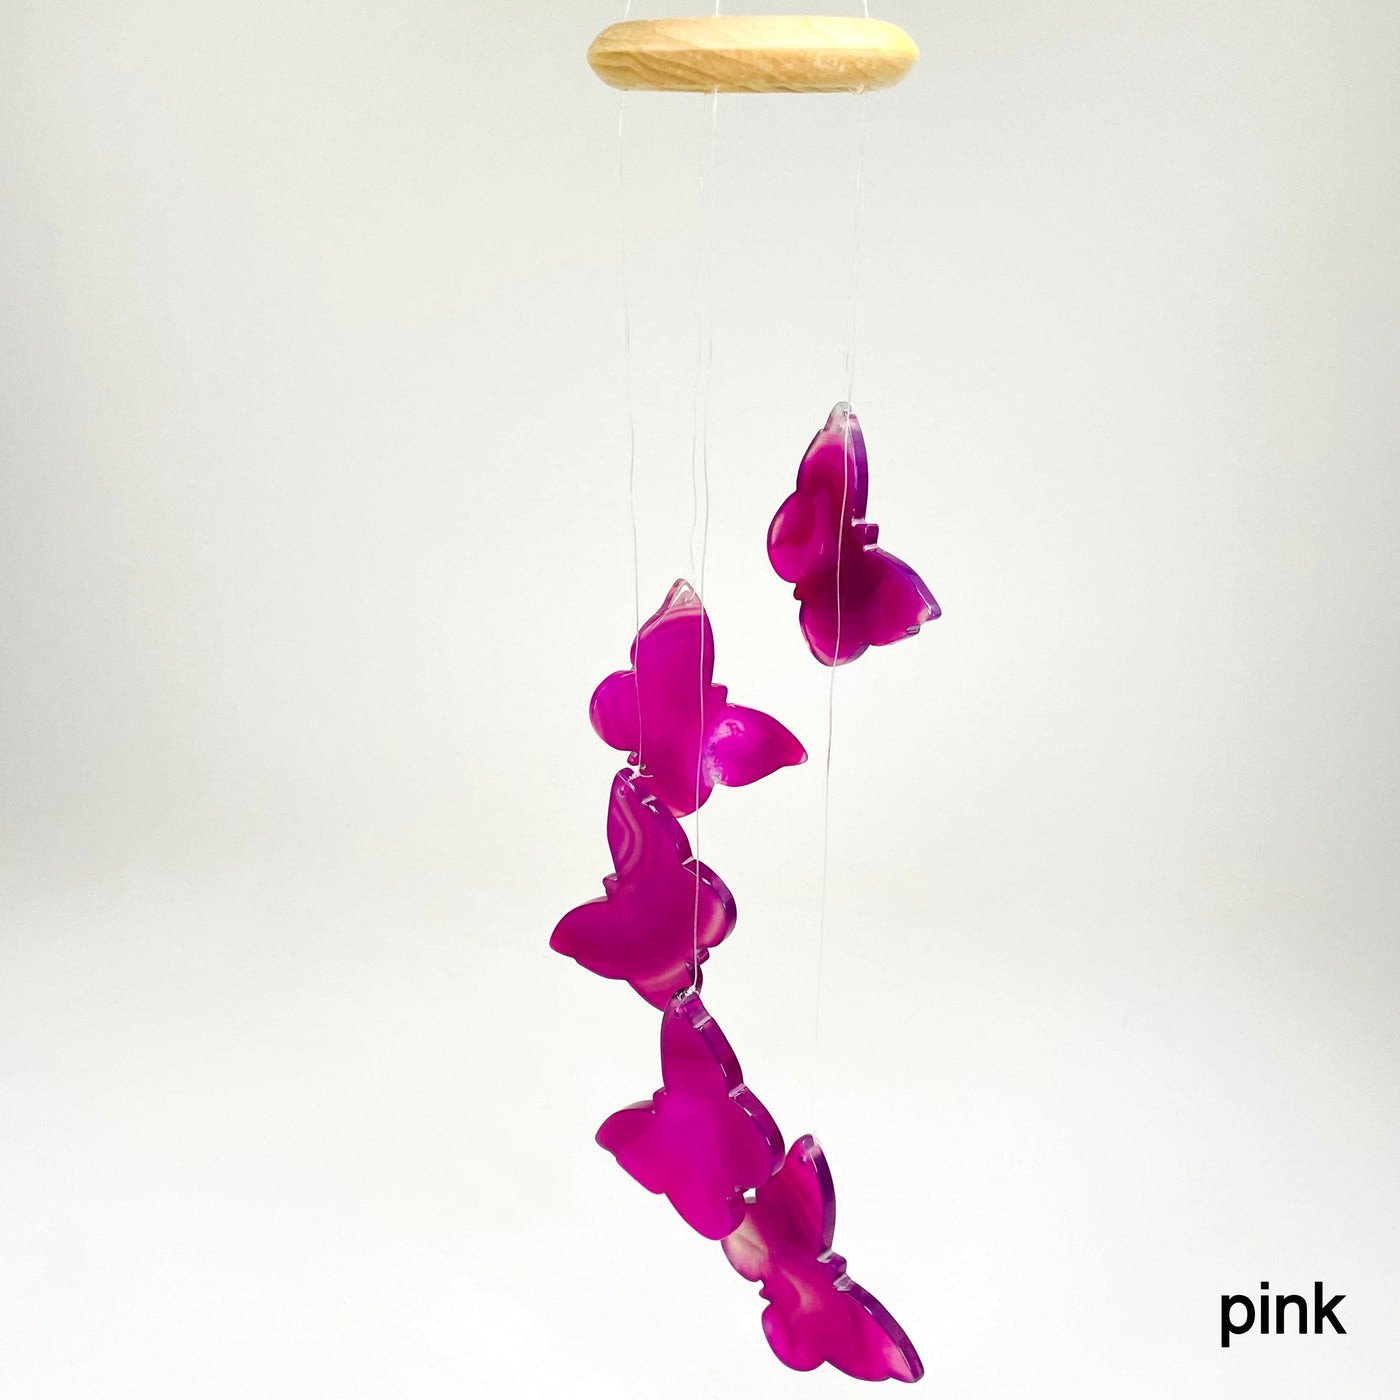 one pink agate butterfly wind chime hanging in front of white background